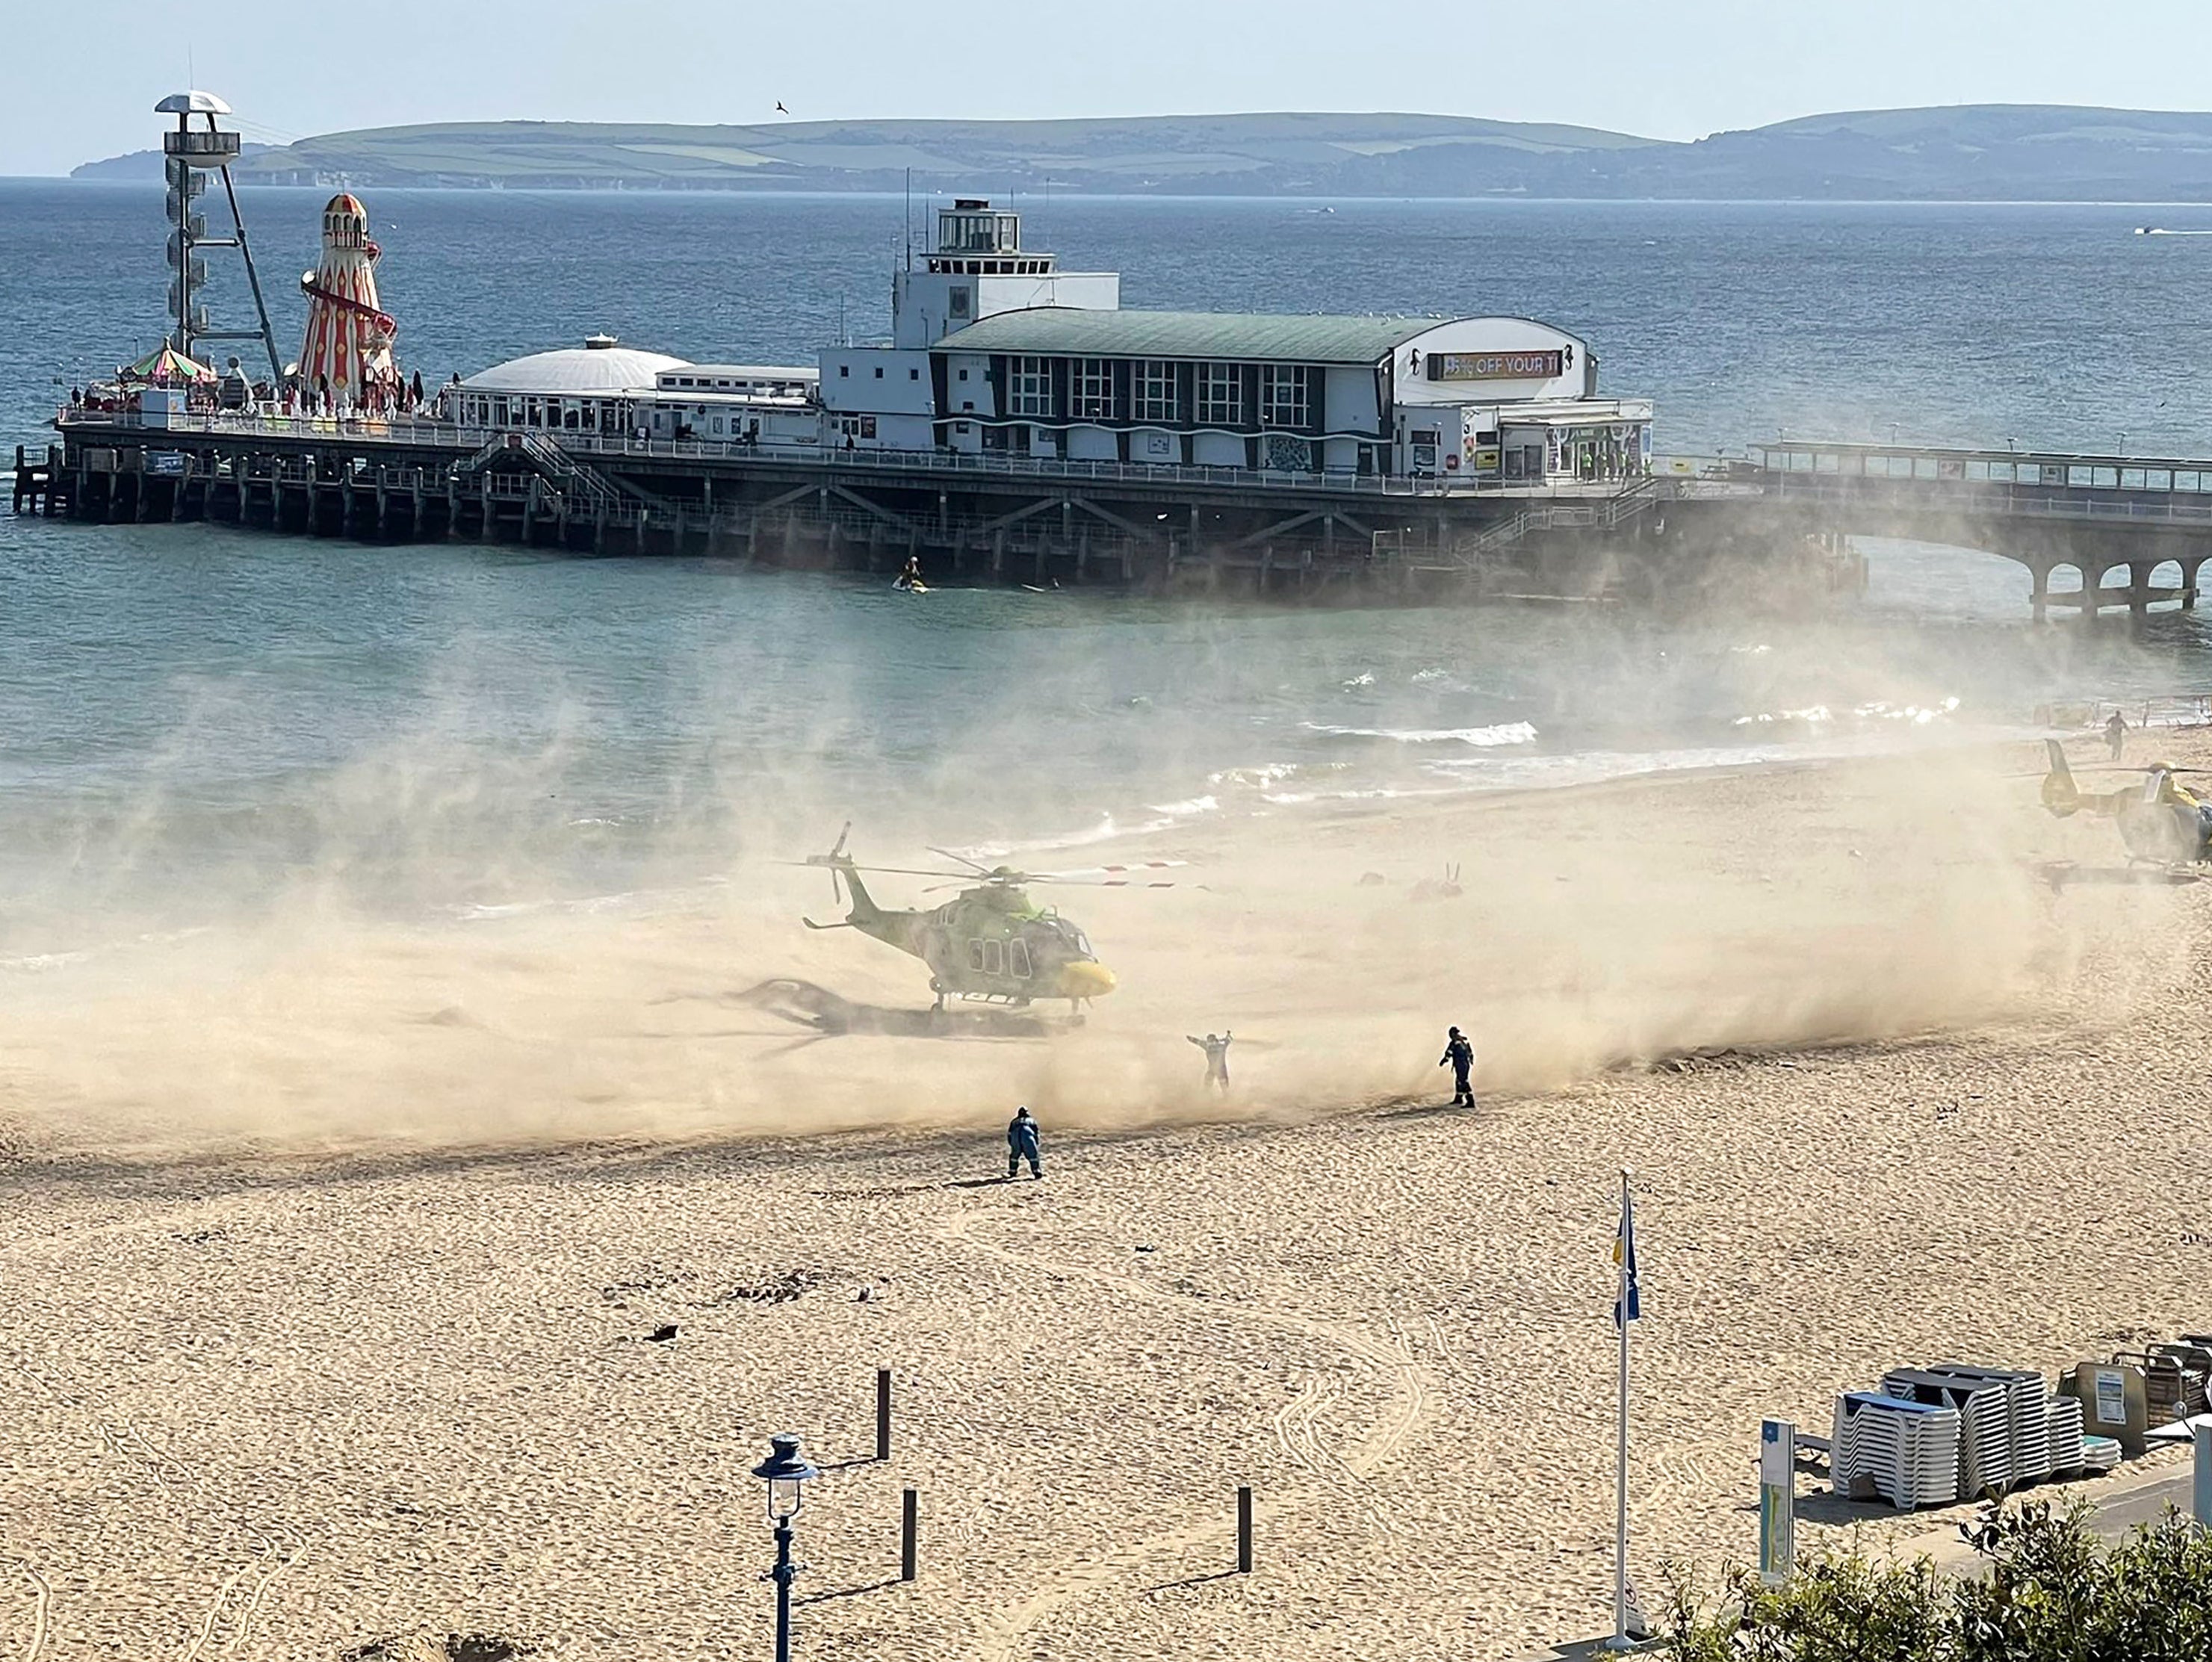 Air ambulances landed on the beach on Wednesday